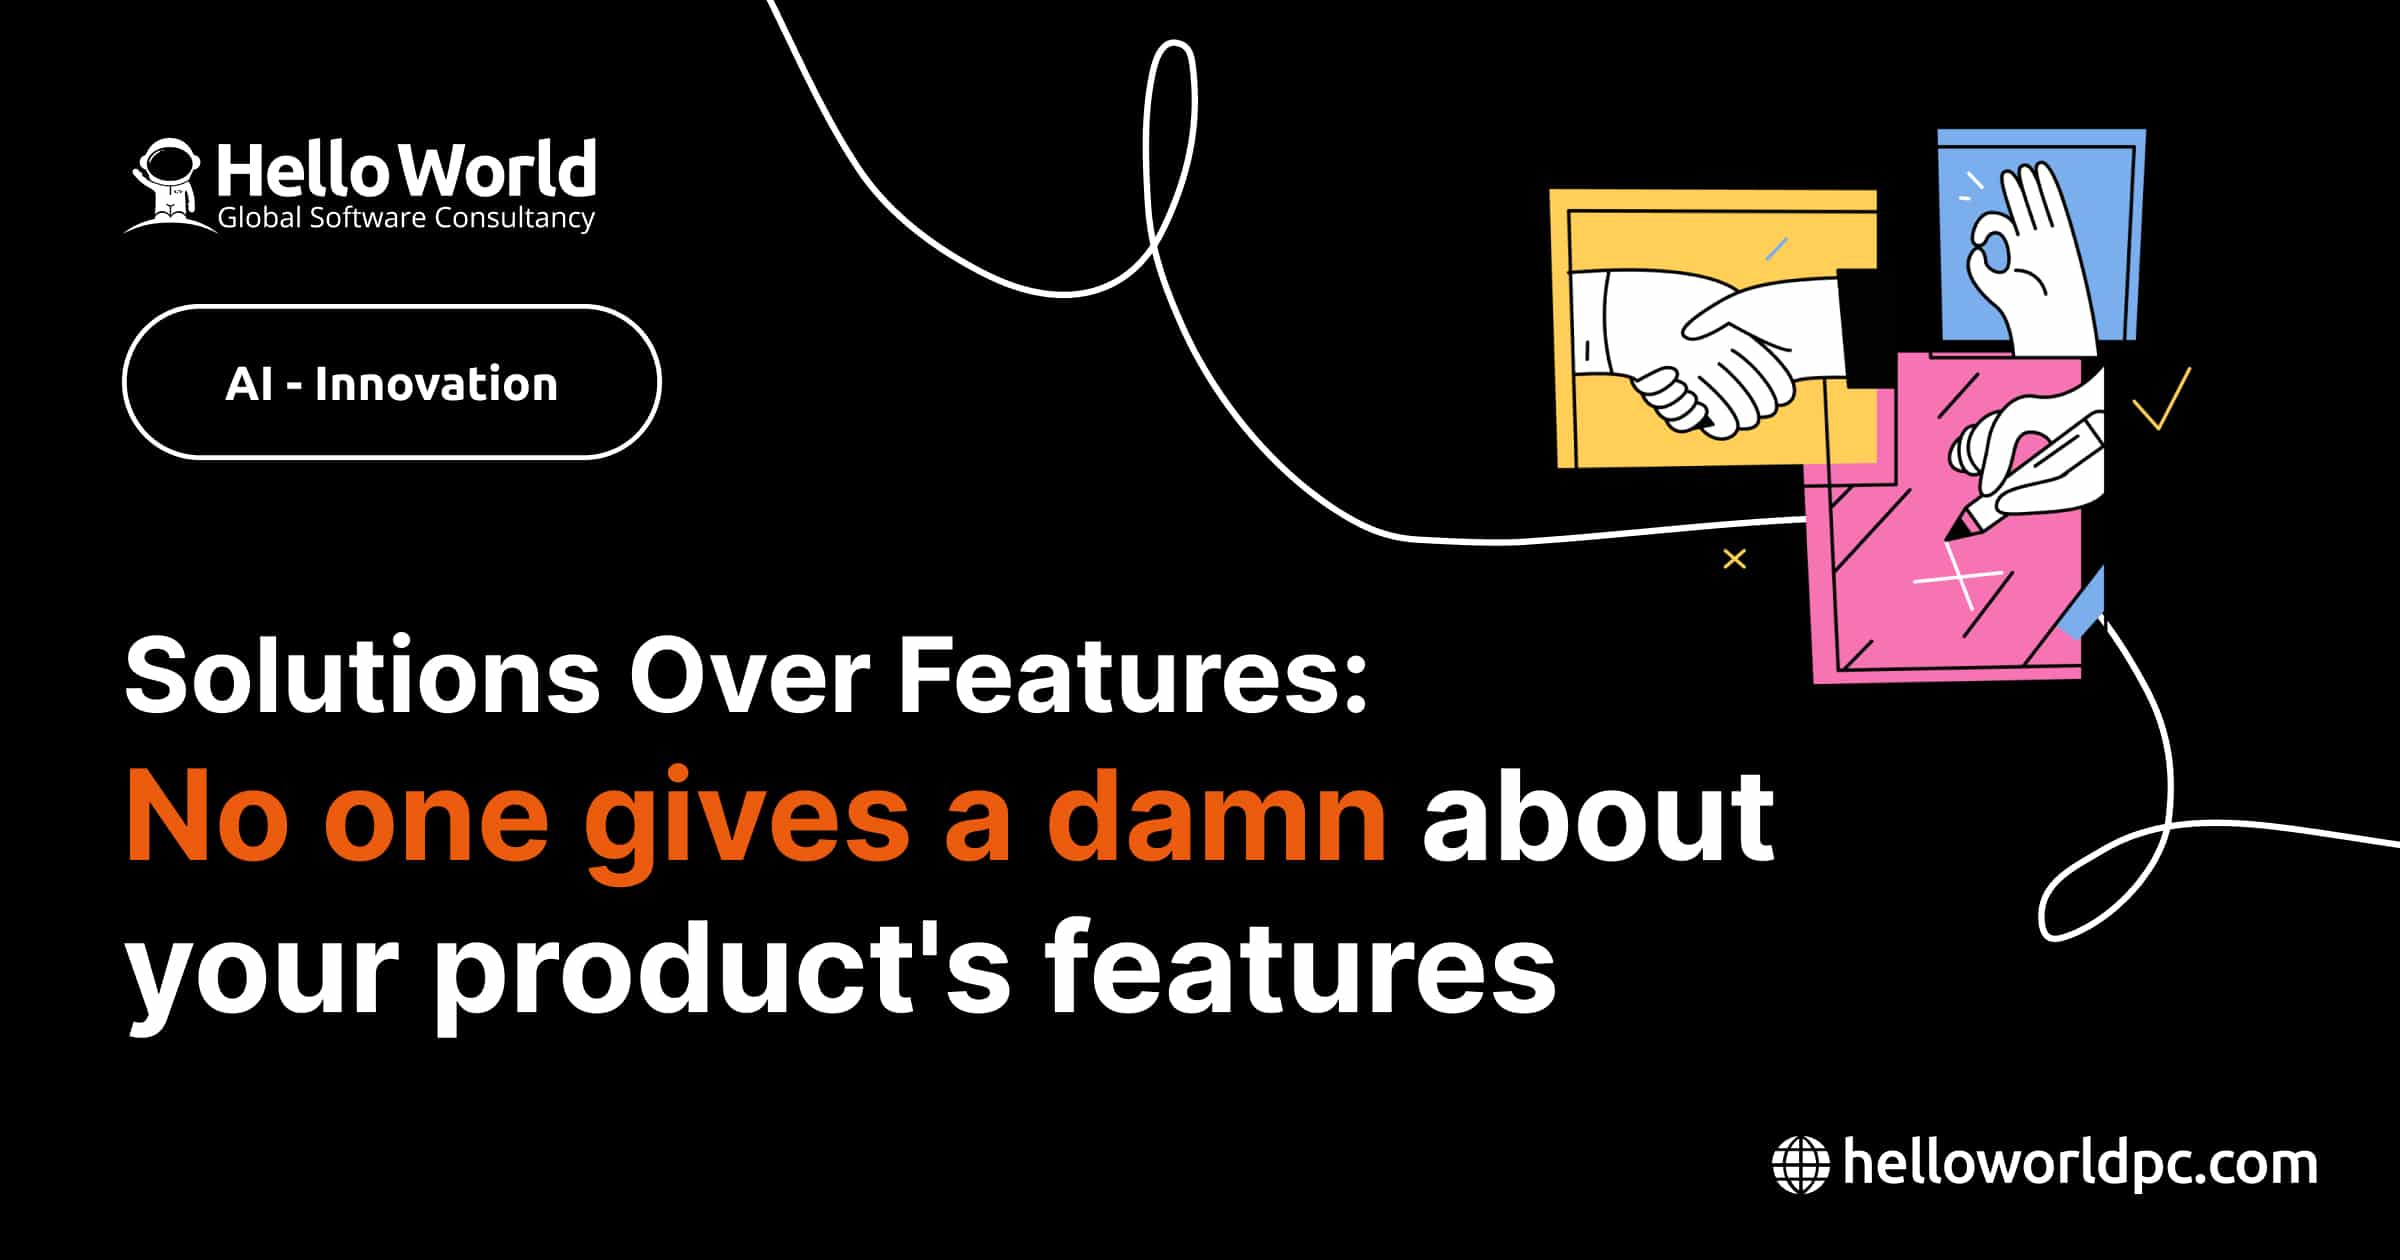 Solutions Over Features: No one gives a damn about your product's features